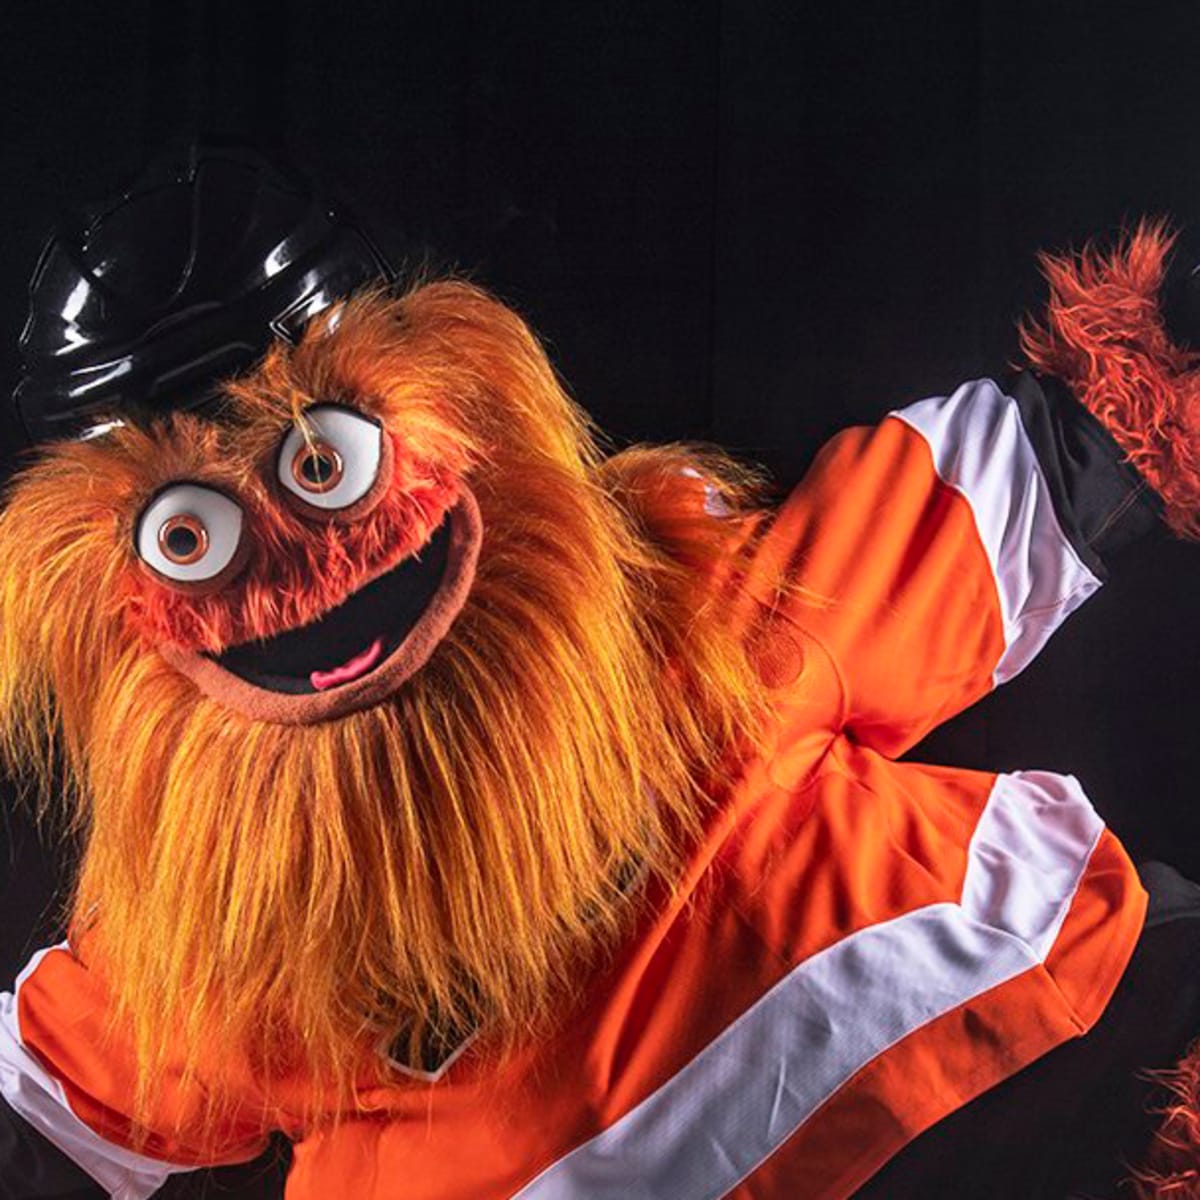 Philadelphia Flyers' Gritty Talks Thanksgiving and More